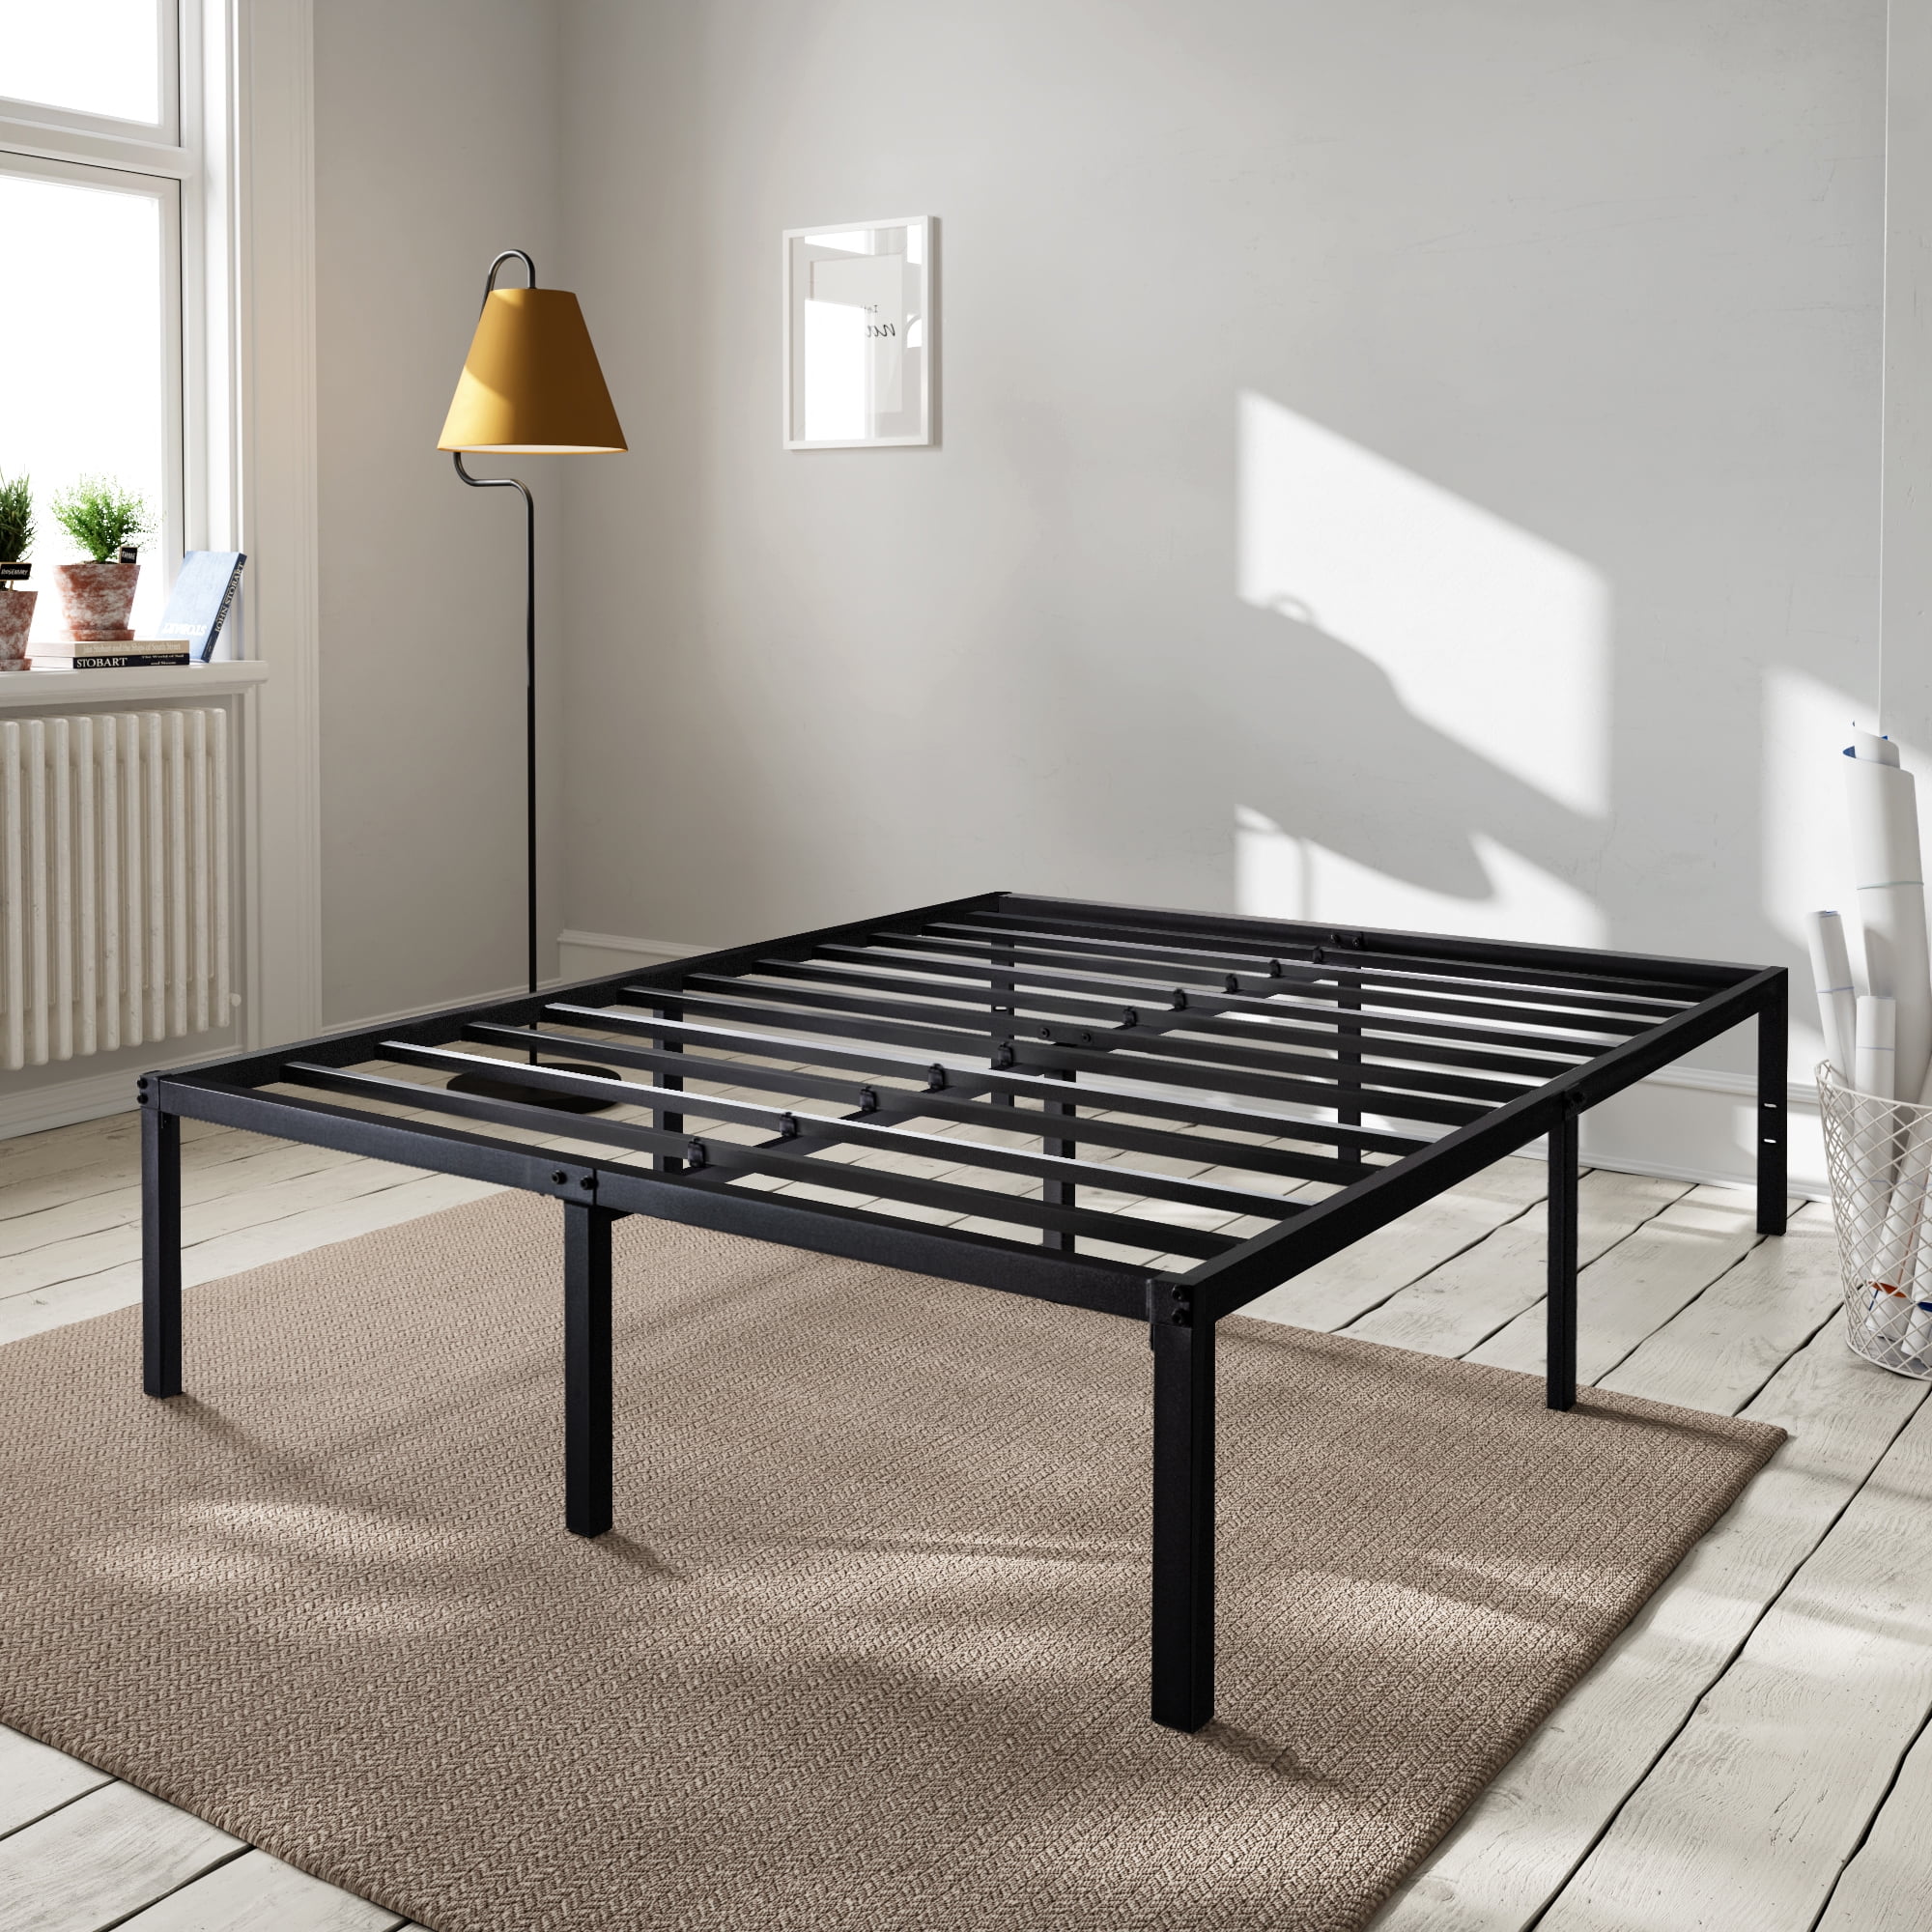 Amolife Heavy Duty Queen Size Metal Platform Bed Frame with 16.5'' Large Under Bed Storage Space